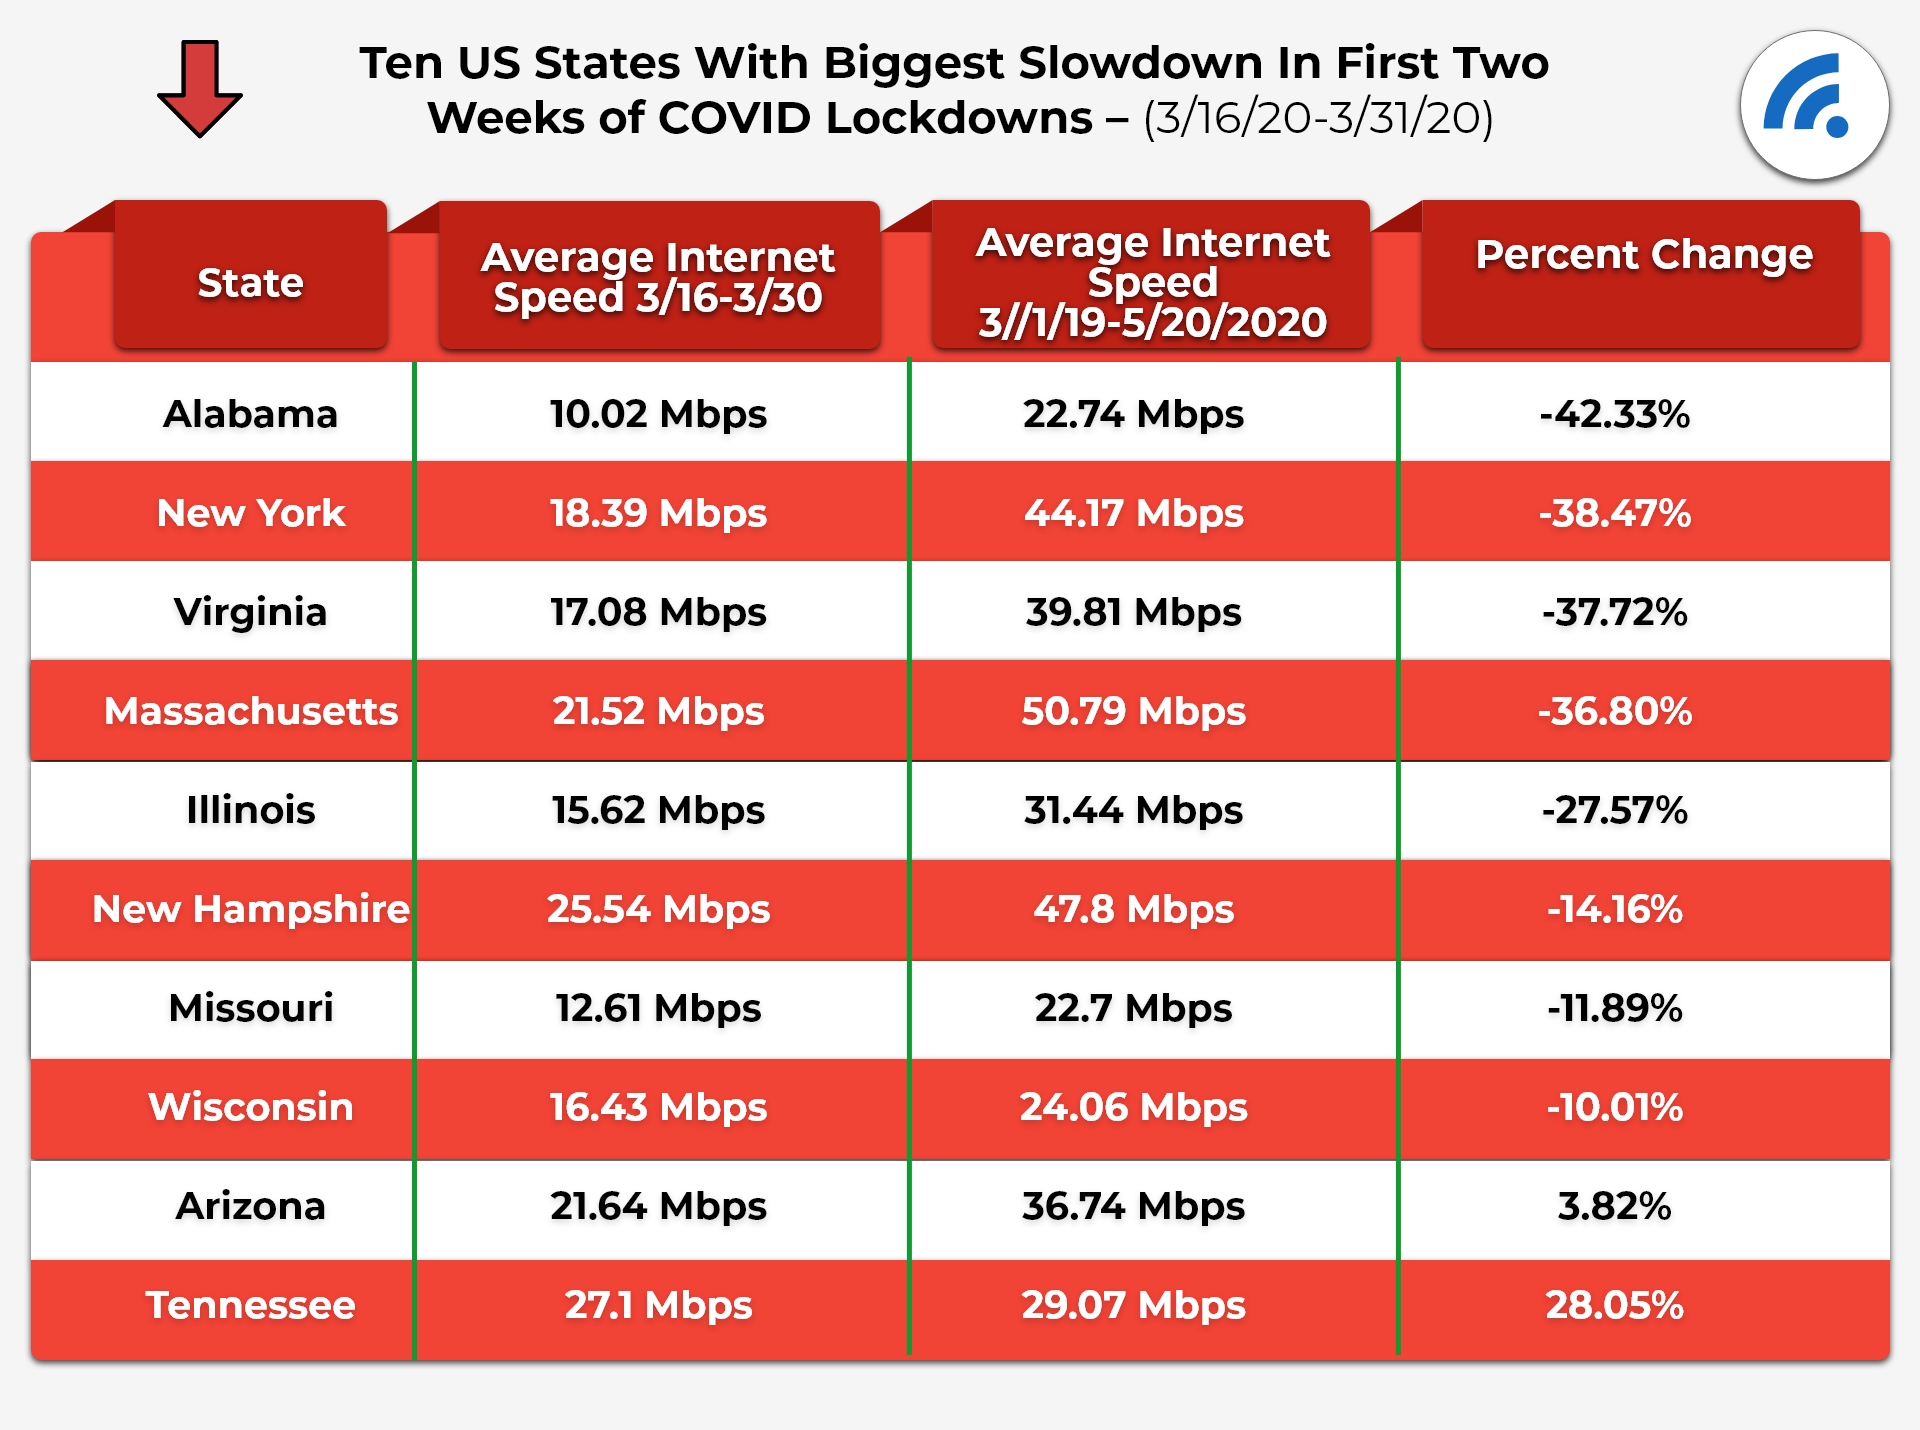 States With The Biggest Slowdown In Dowload Speed During COVID-19 Lockdowns